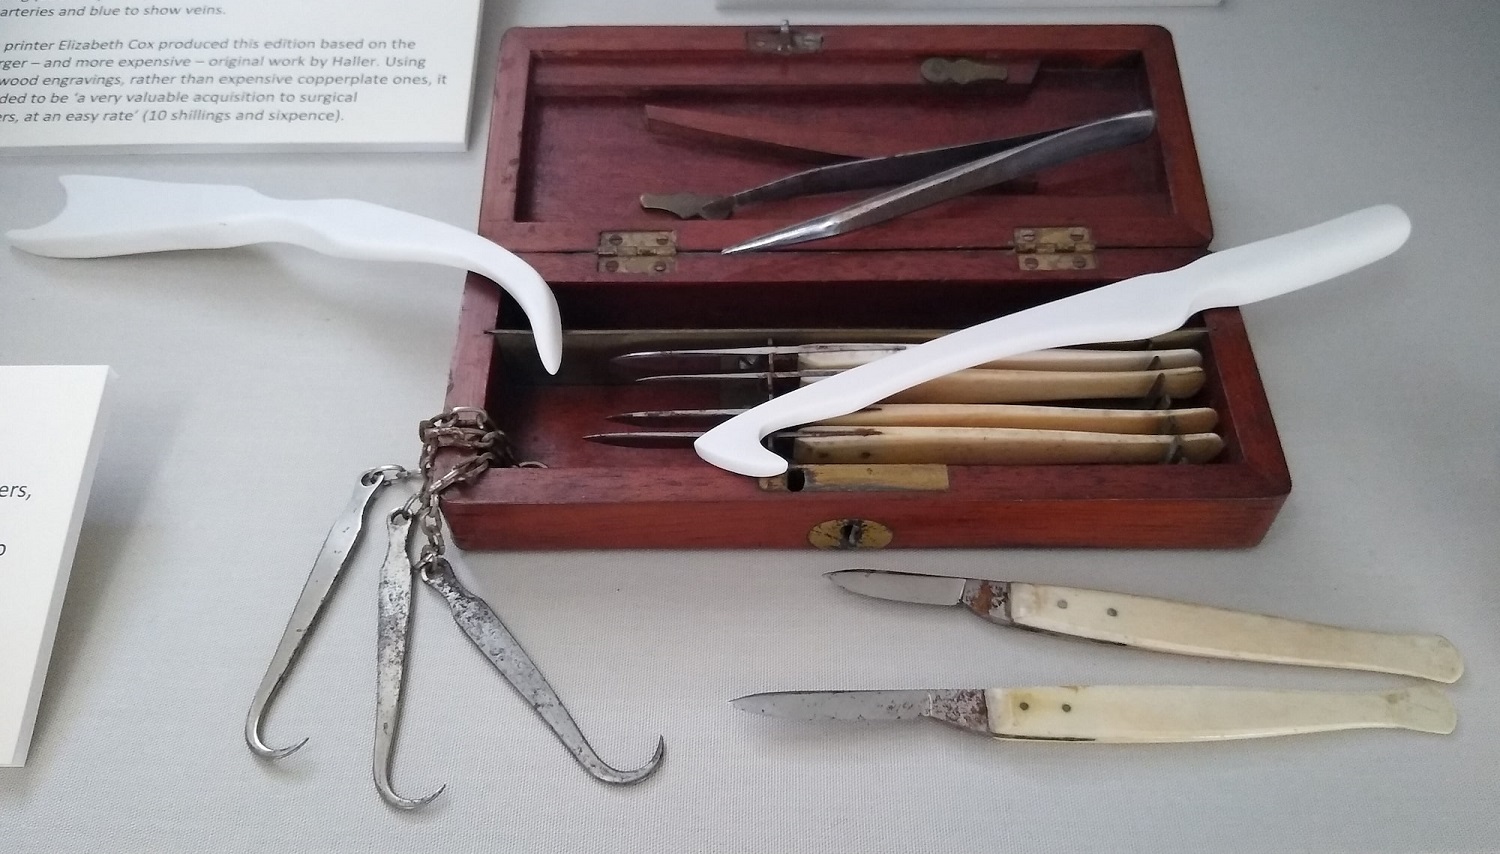 A set of dissection instruments and their mahogany wood case displayed with sculpted porcelain surgical tools.